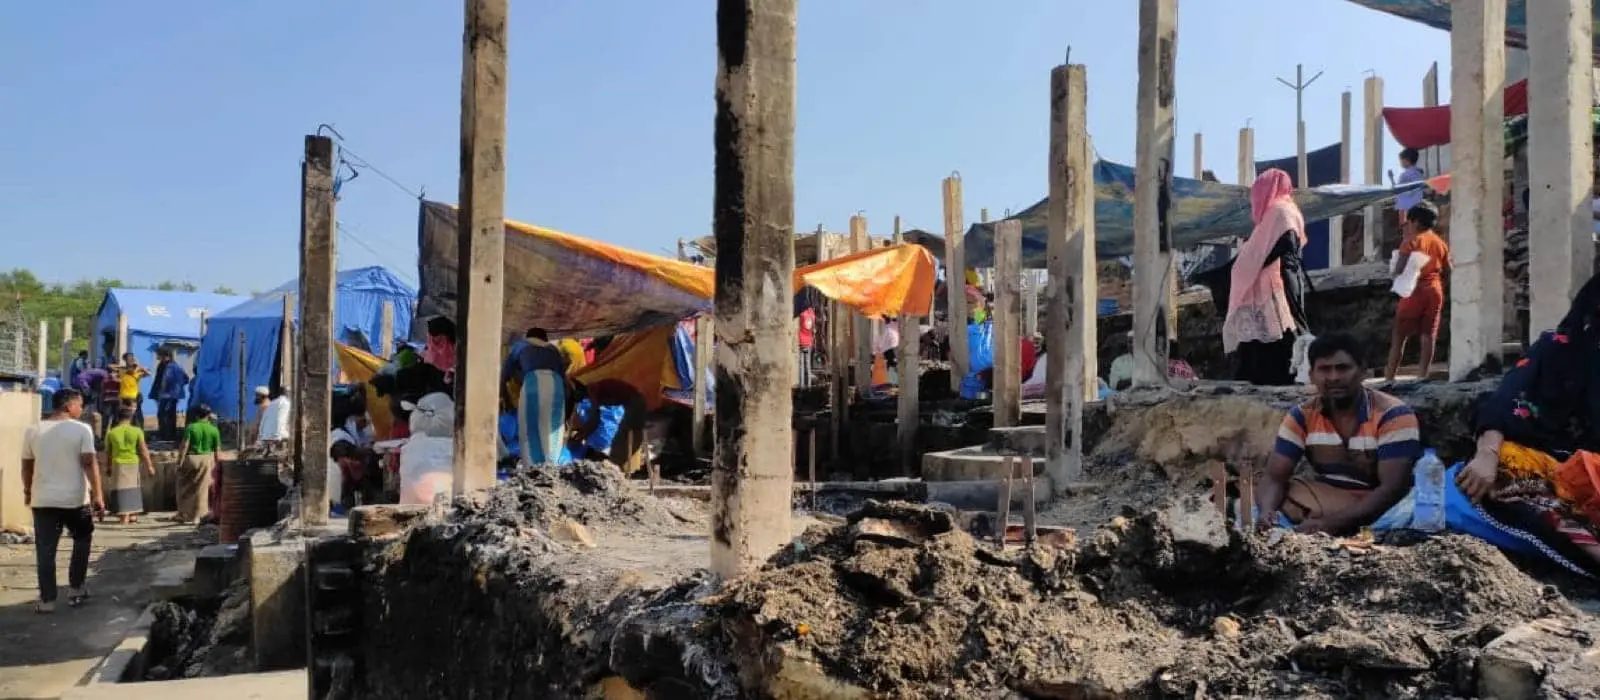 Destruction of the fire at the refugee camp in Bangladesh